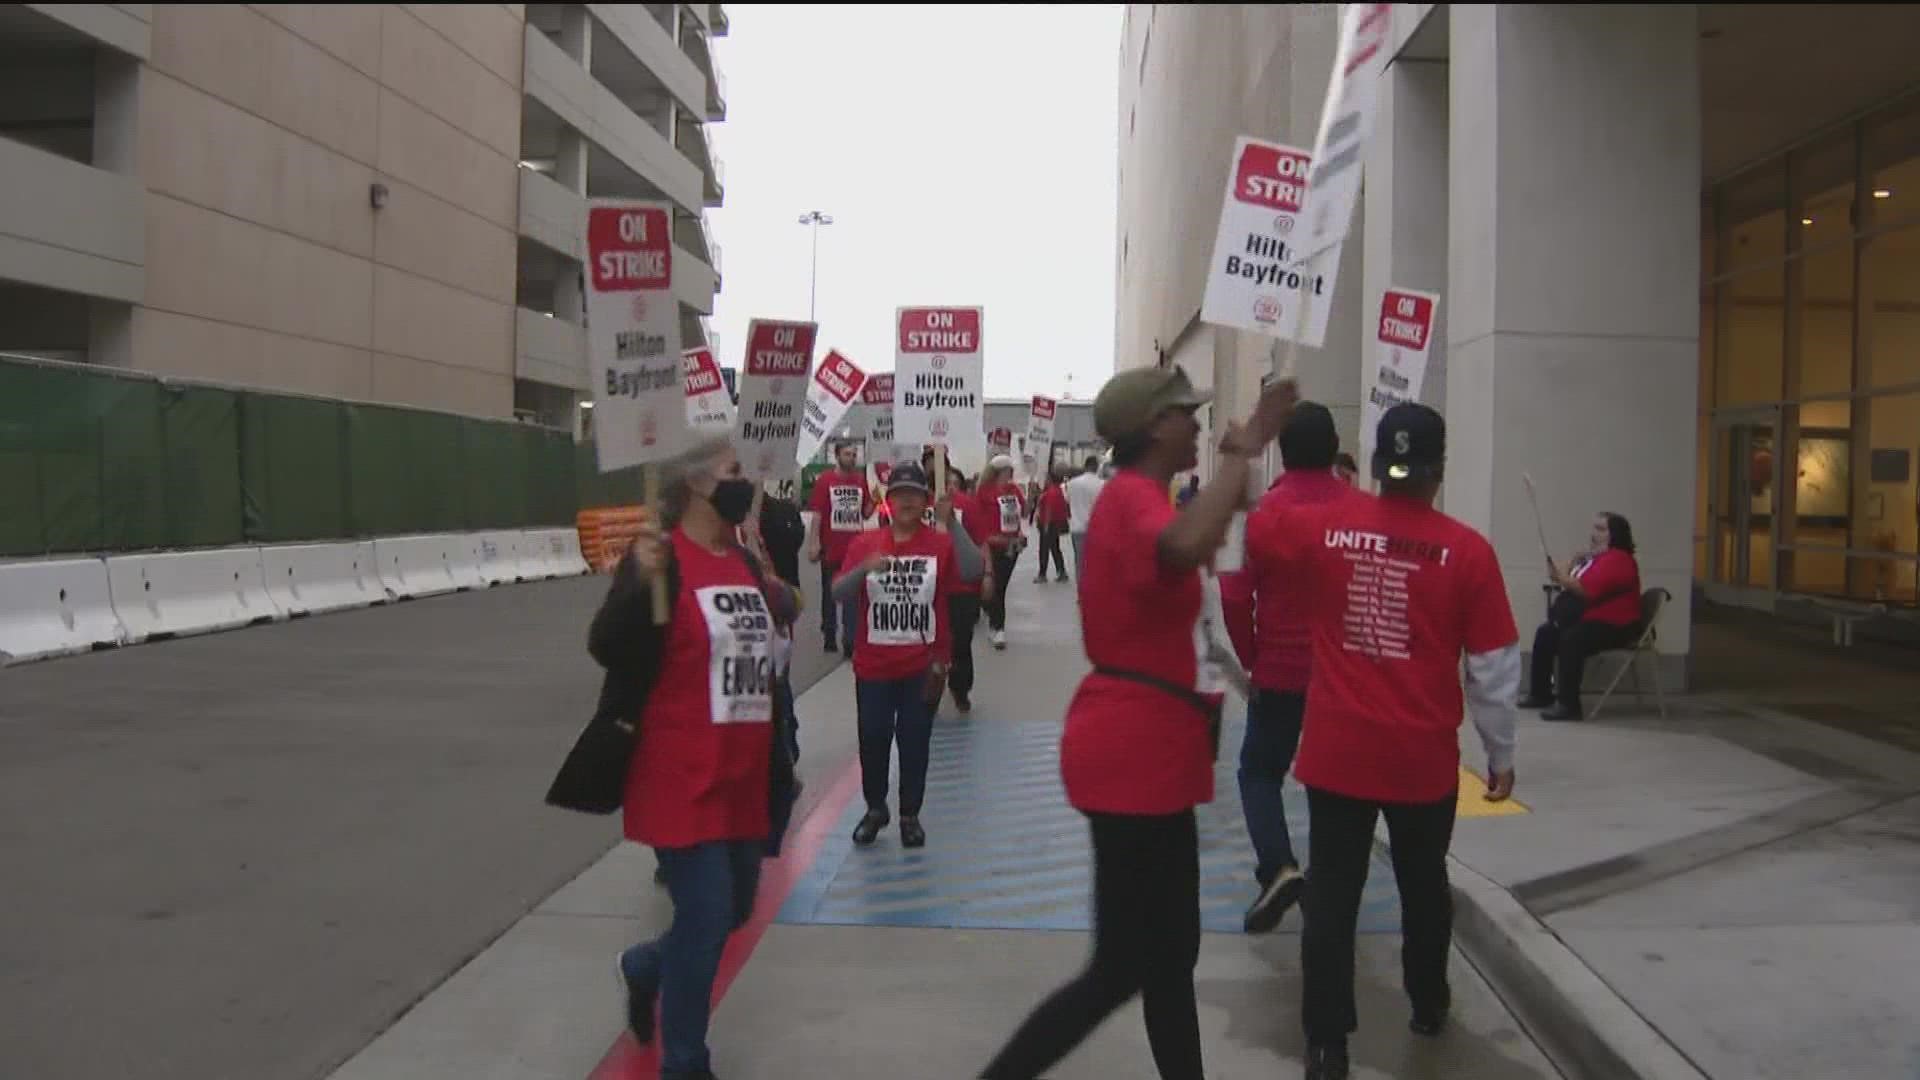 Unite Here Local 30 announced their decision on Twitter late Tuesday night, after bargaining talks failed and an agreement could not be reached.